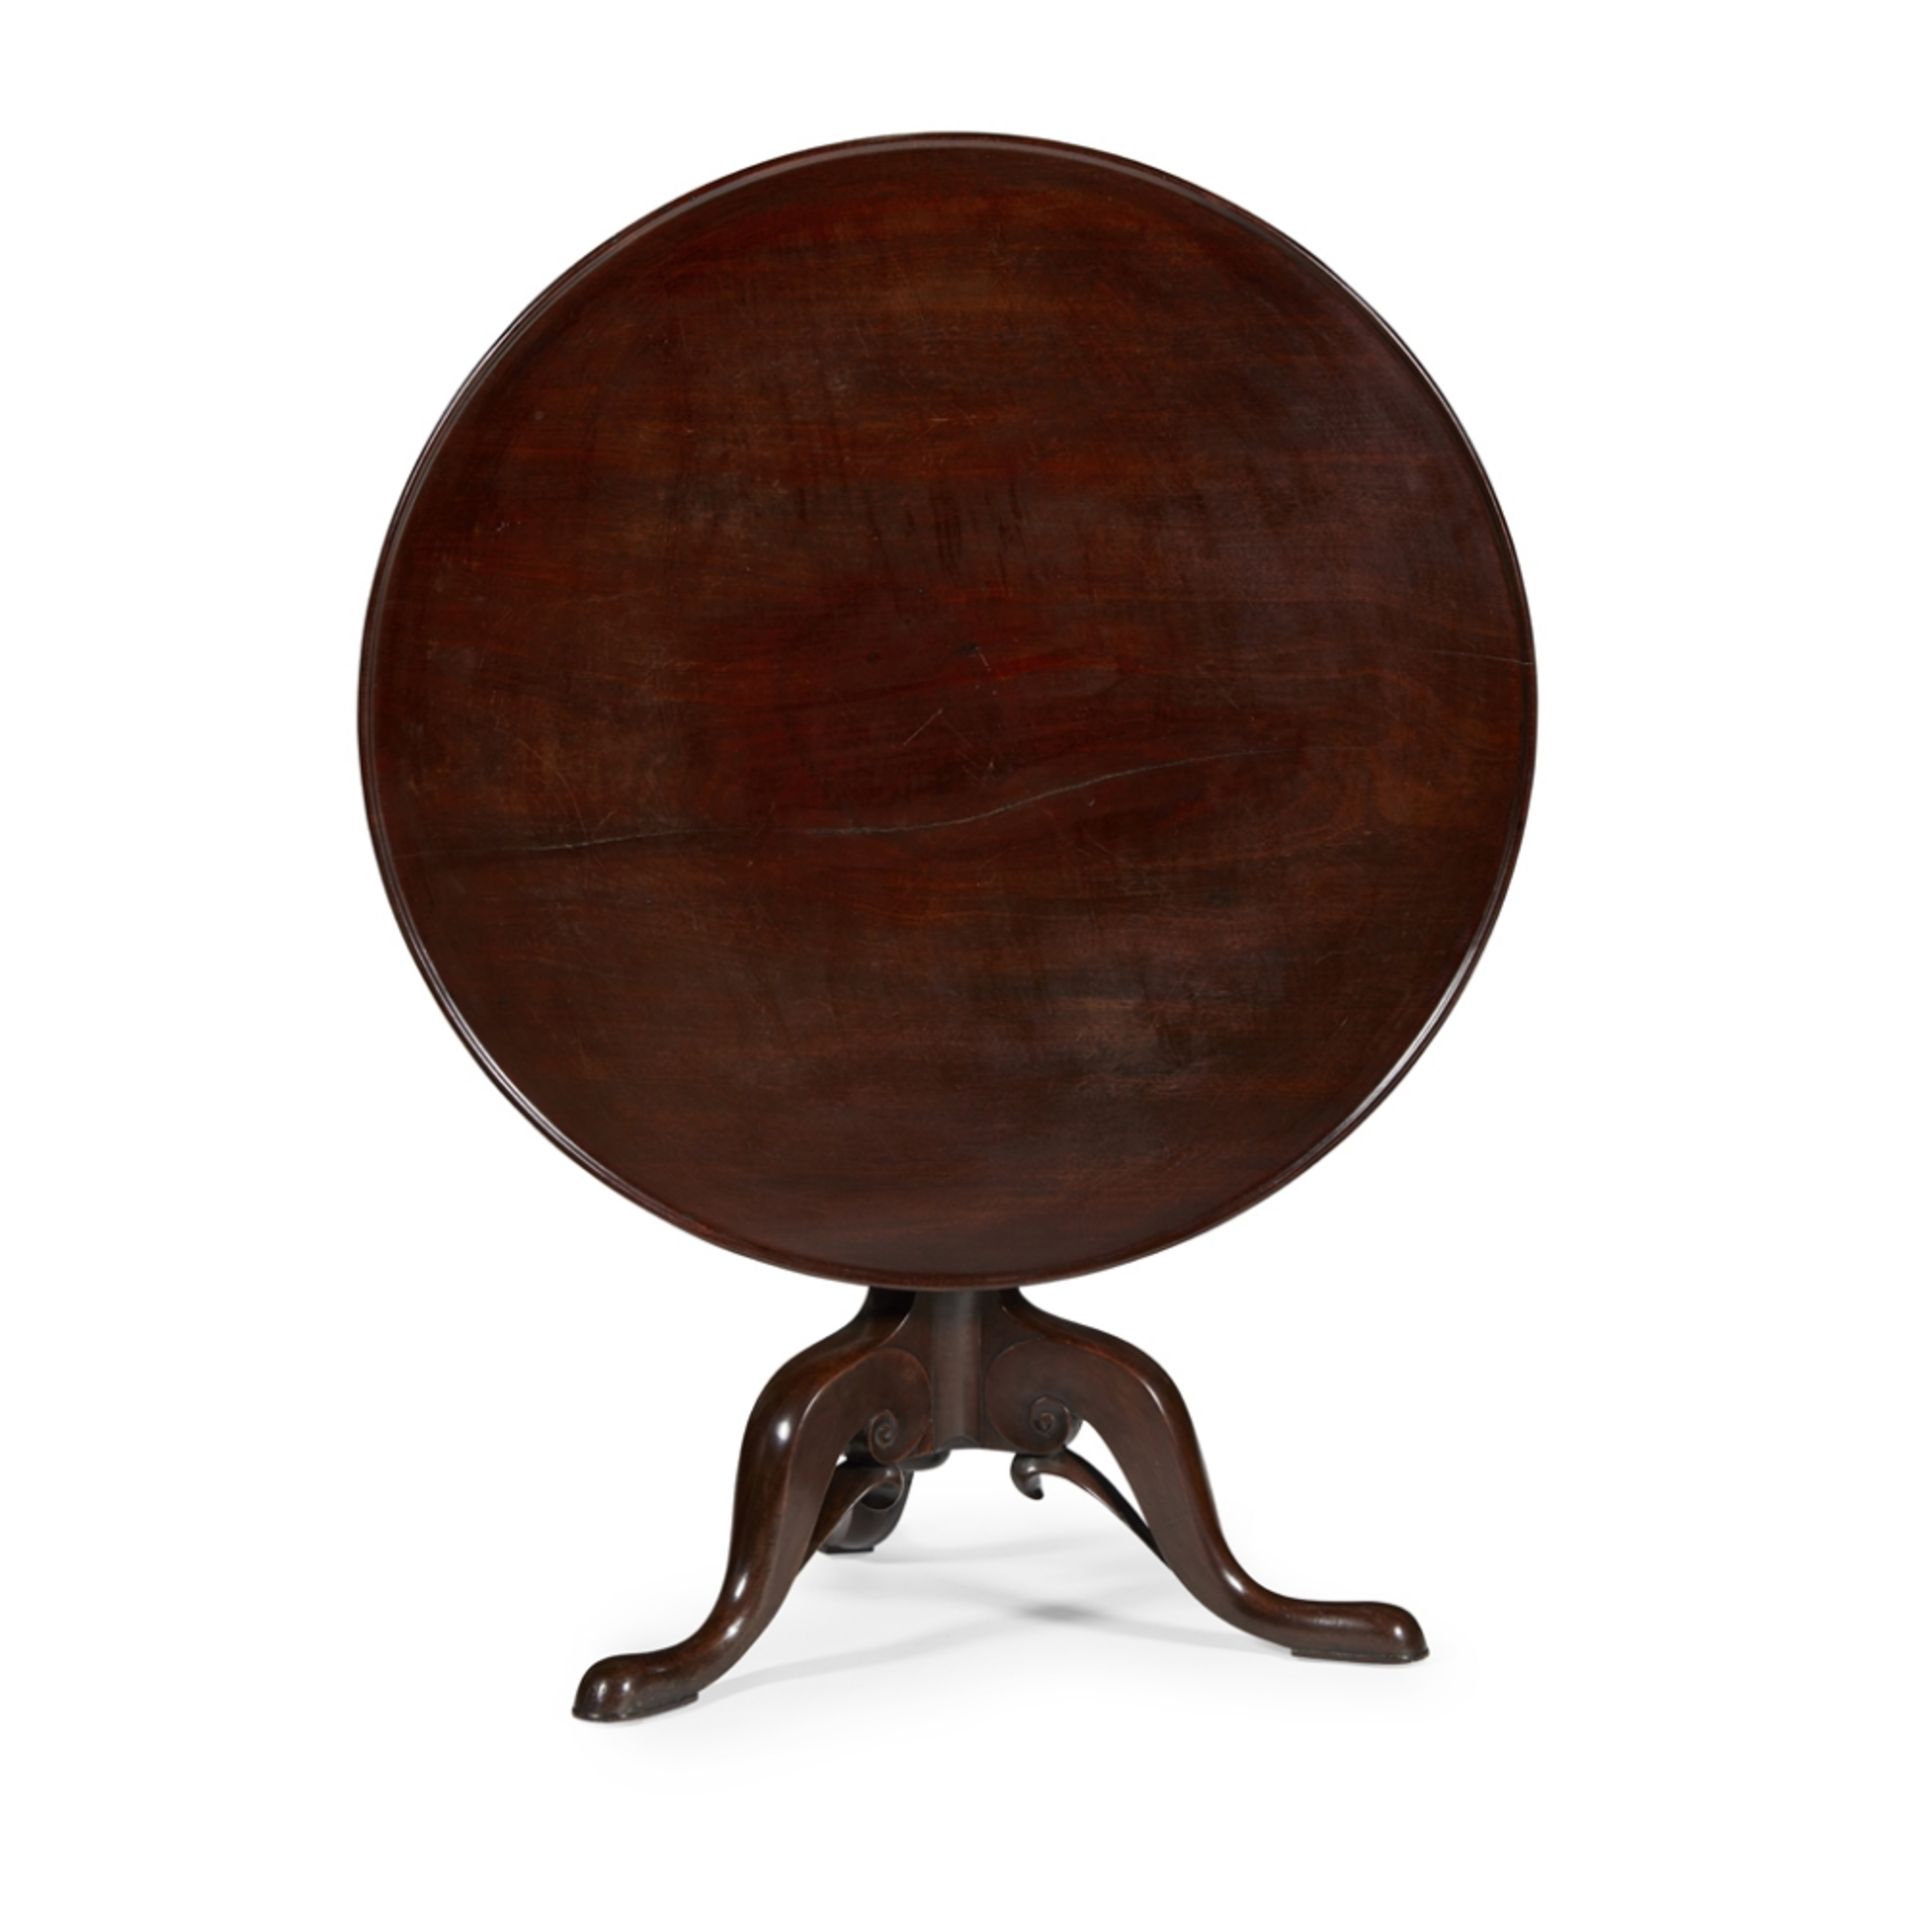 GEORGE III MAHOGANY BIRDCAGE TEA TABLE18TH CENTURY the dished circular top above a birdcage and - Image 2 of 2